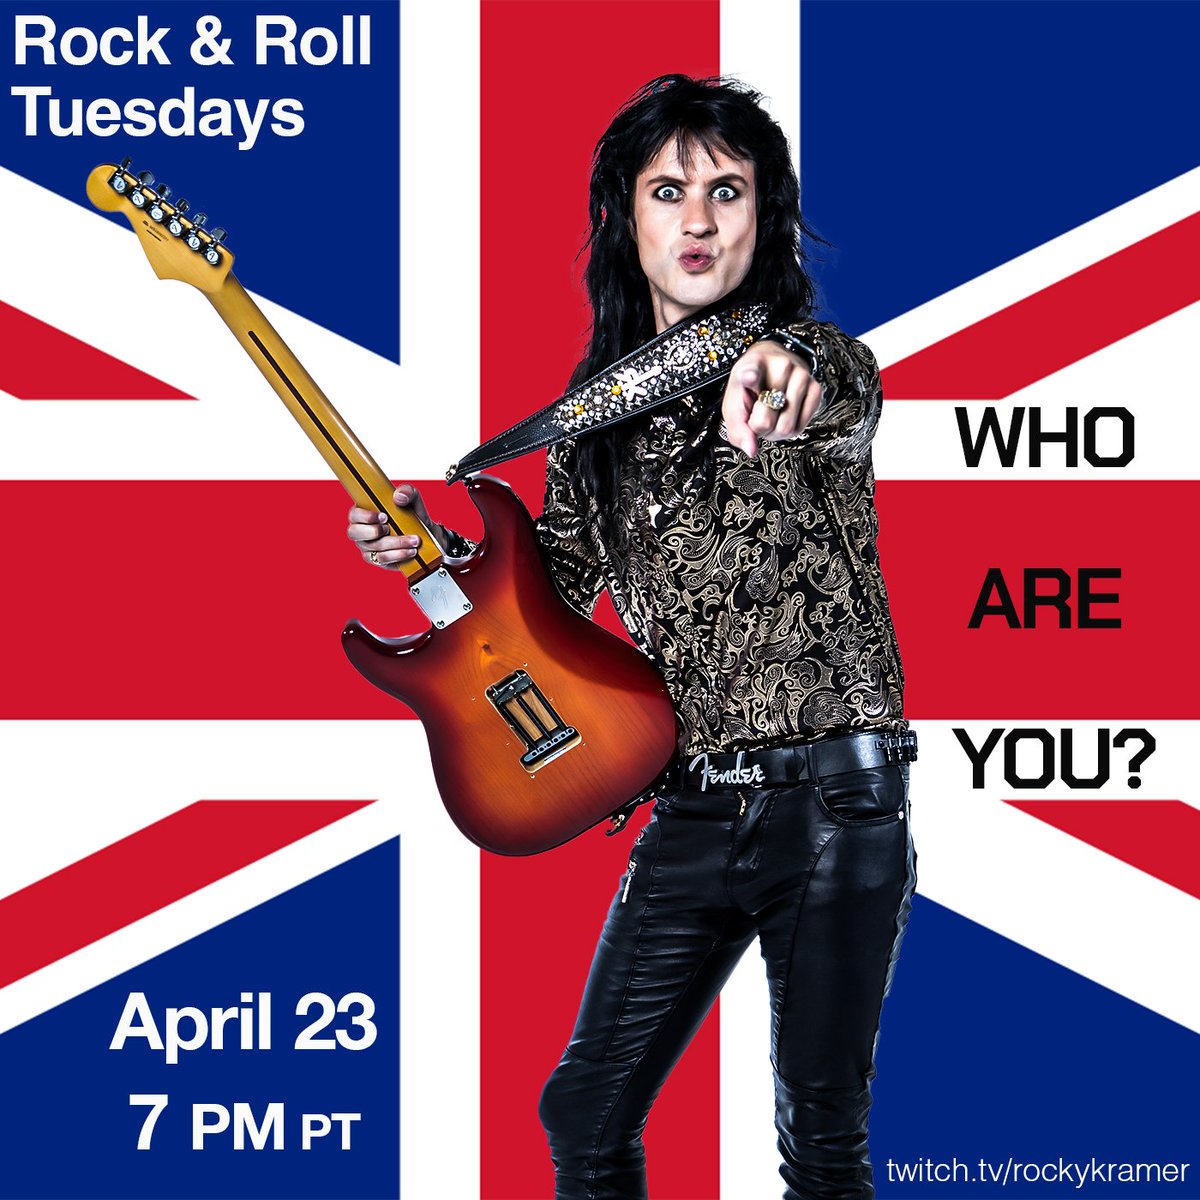 Rock & Roll Tuesdays: Who Are You? April 23, 7 PM PT. Twitch.tv/rockykramer #TheWho